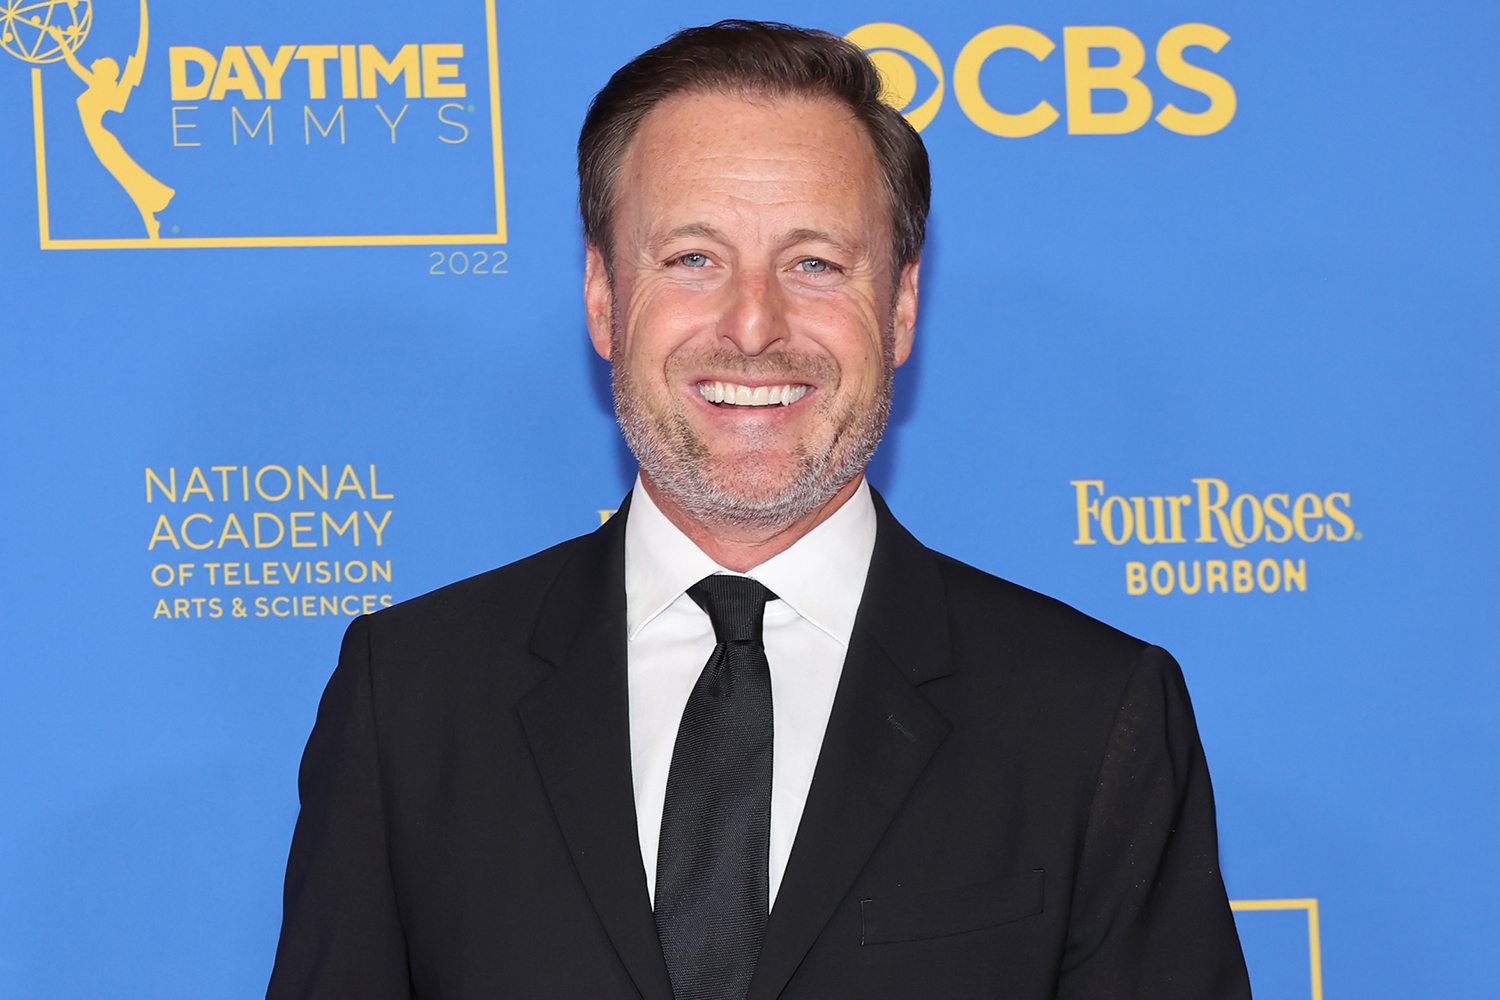 Chris Harrison attends the 49th Daytime Emmy Awards